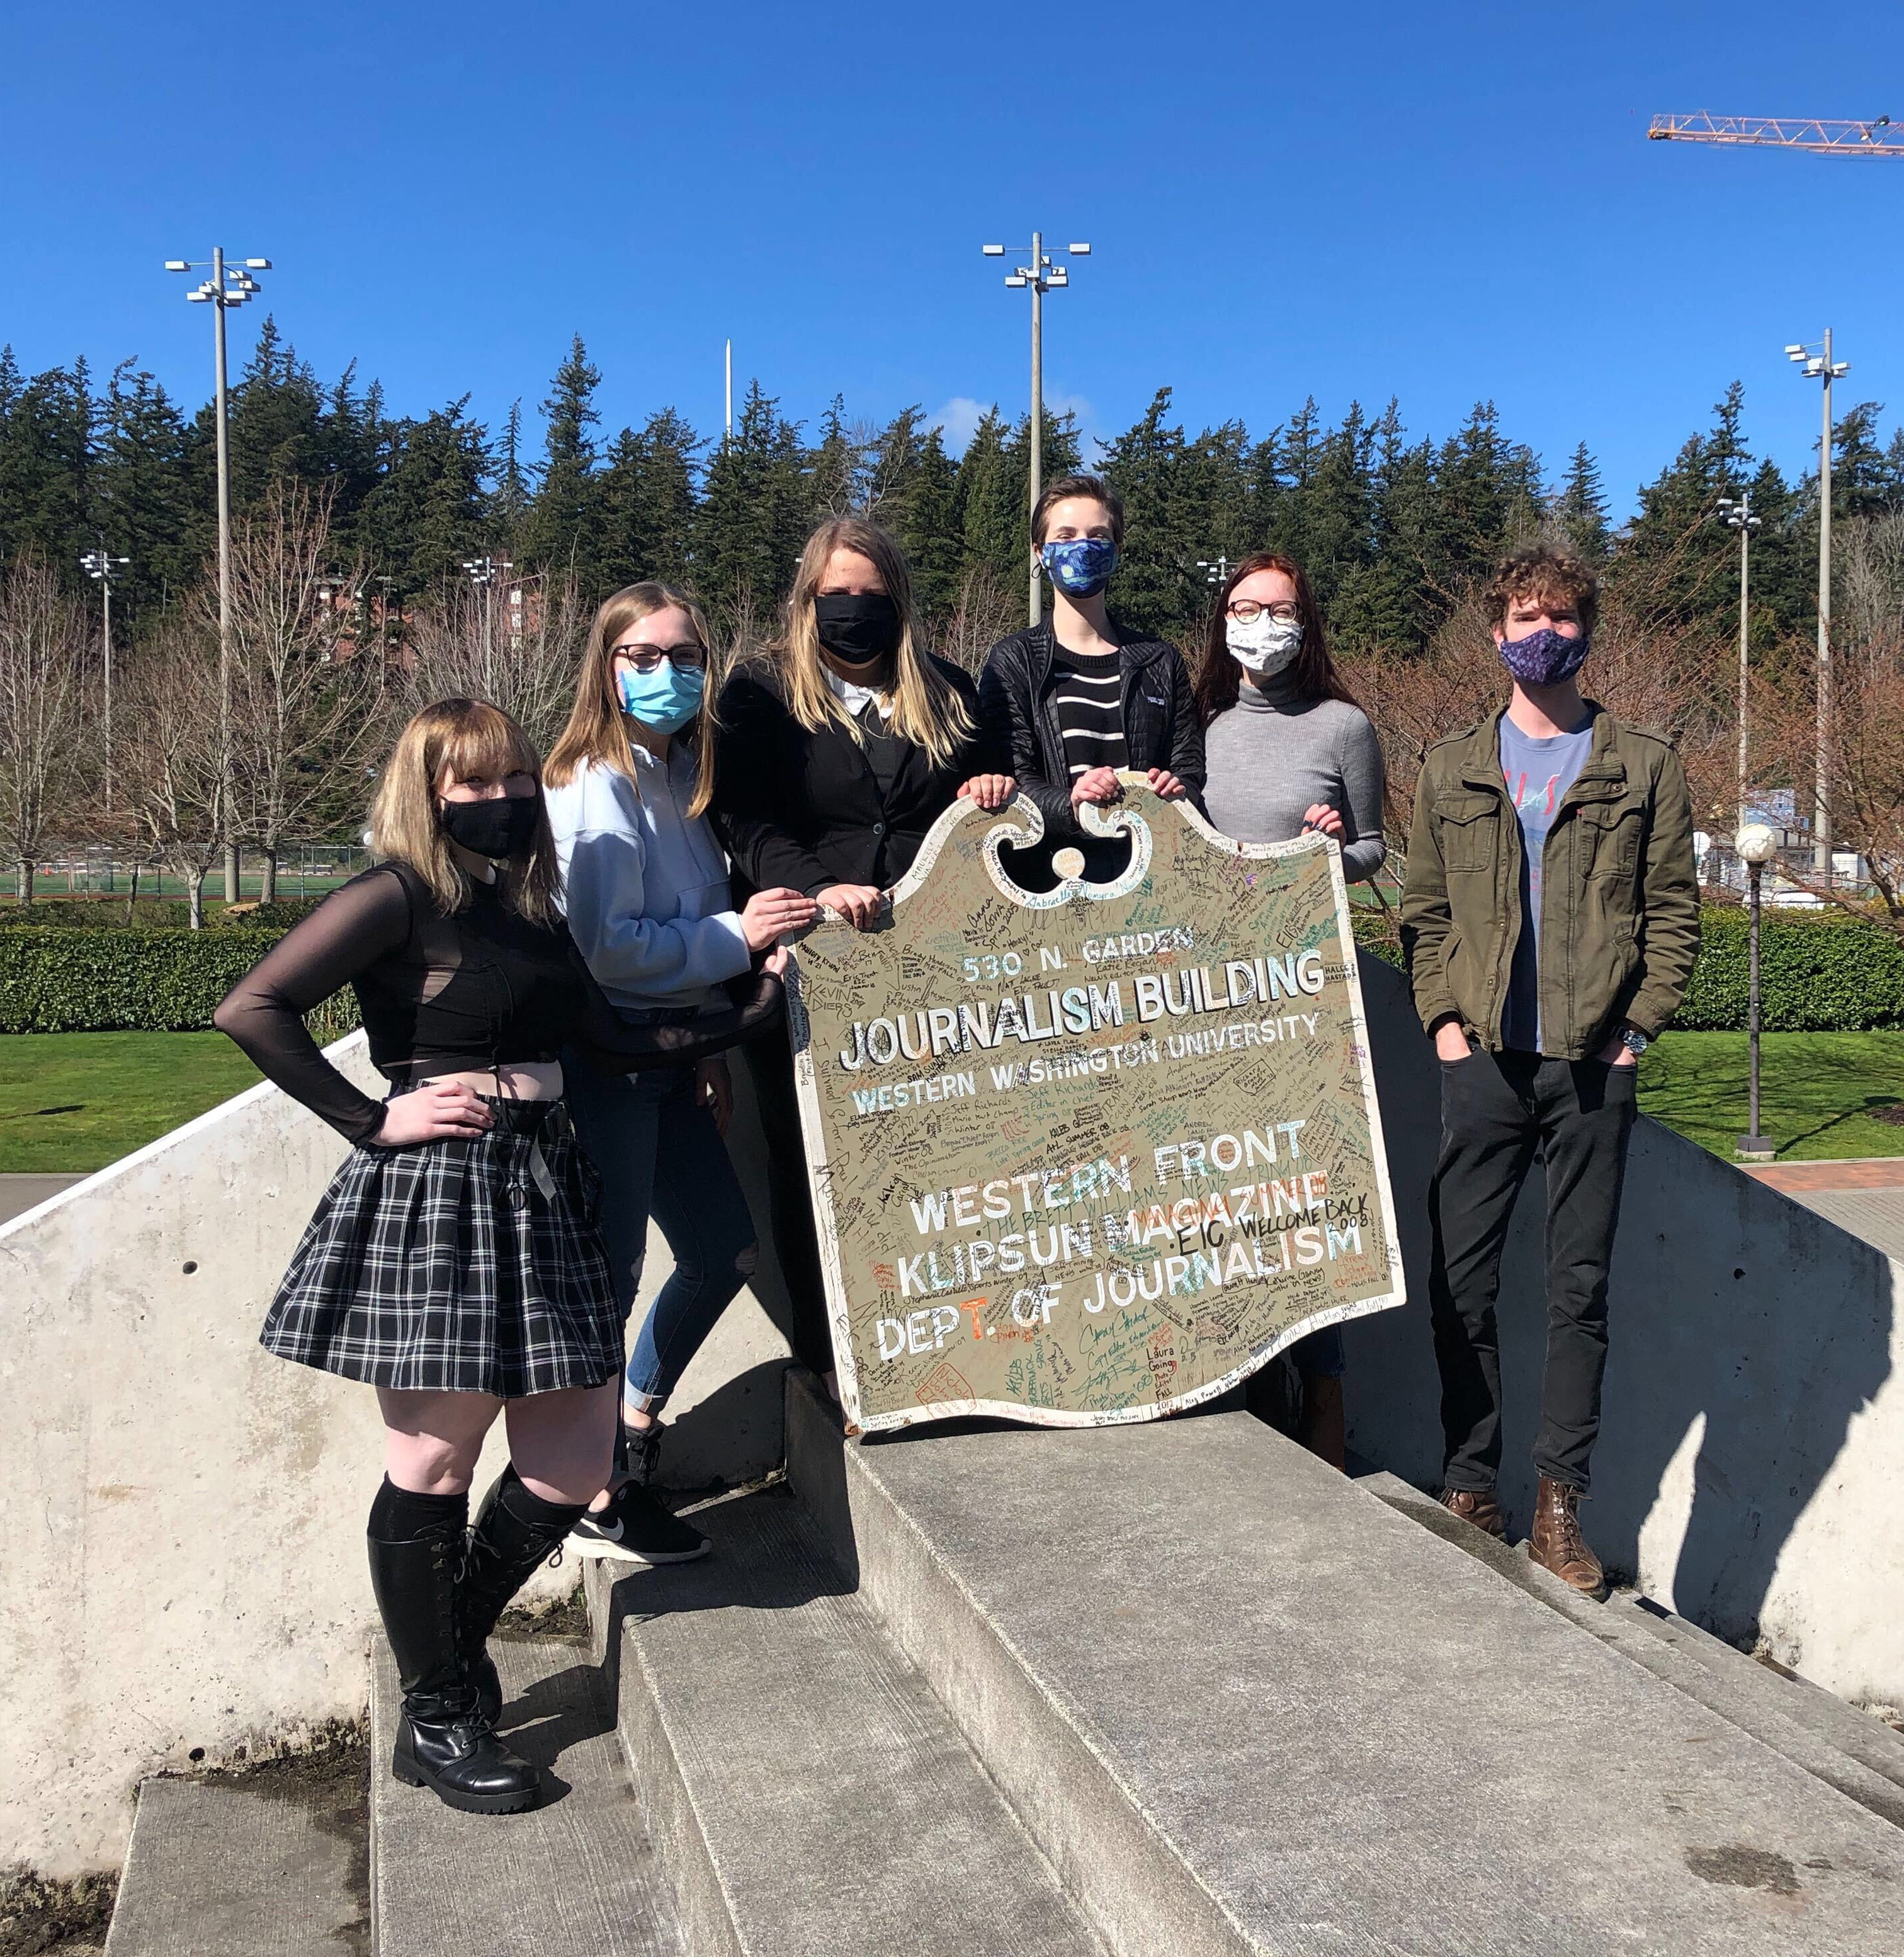 Six students are standing on top of the Stadium Piece sculpture, all facing the photographer. They are holding a plaque that says "Department of Journalism Western Washington University" and has hundreds of signatures on it.